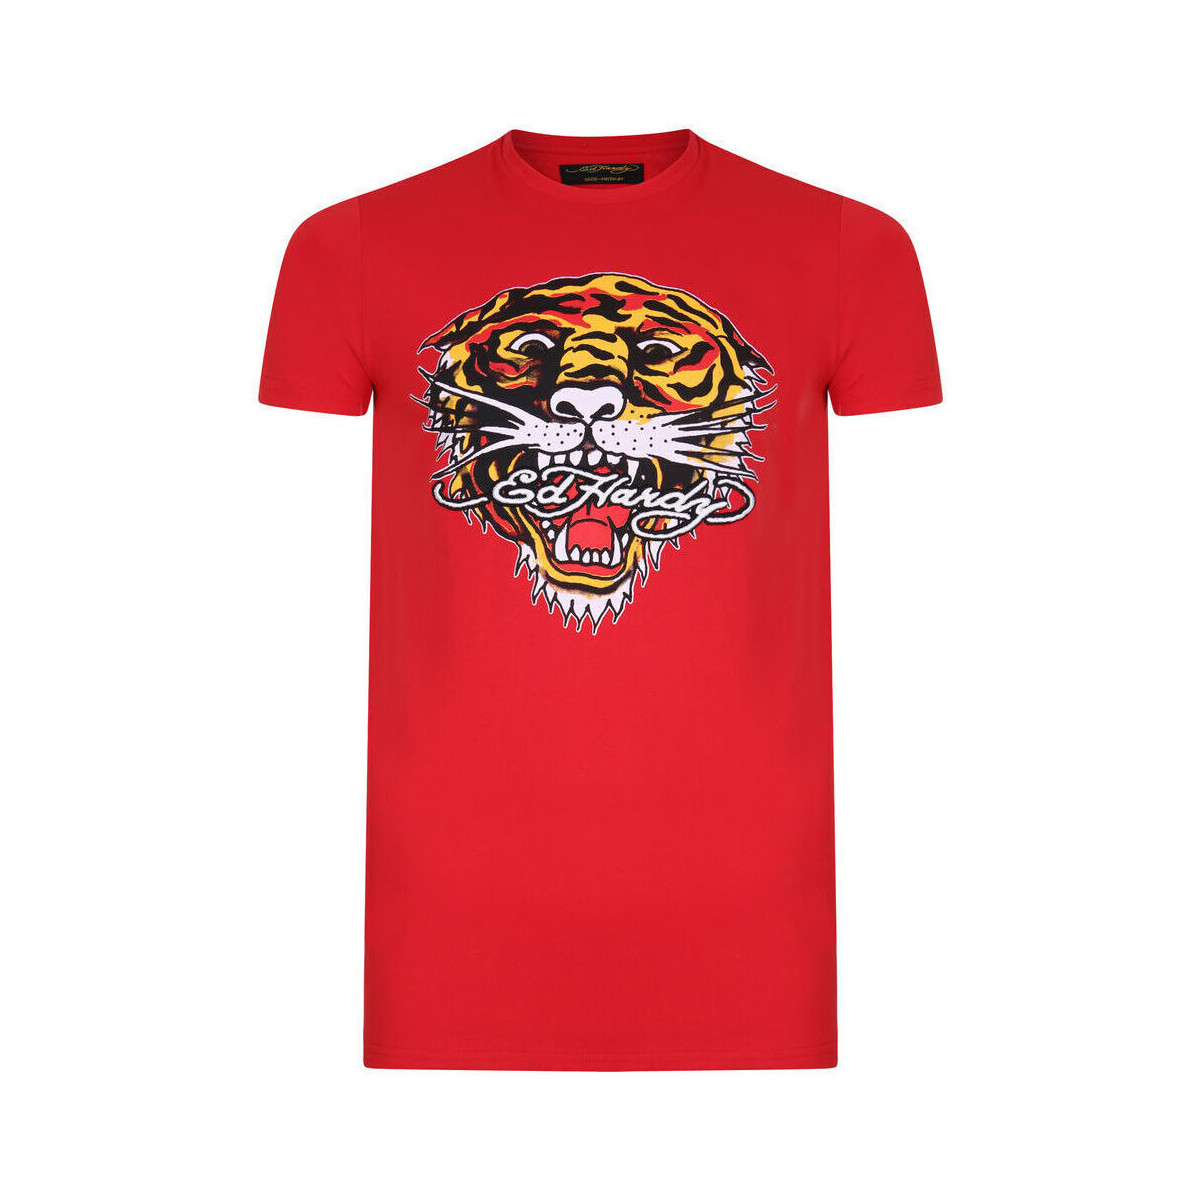 textil Hombre Tops y Camisetas Ed Hardy Tiger mouth graphic t-shirt red Rojo